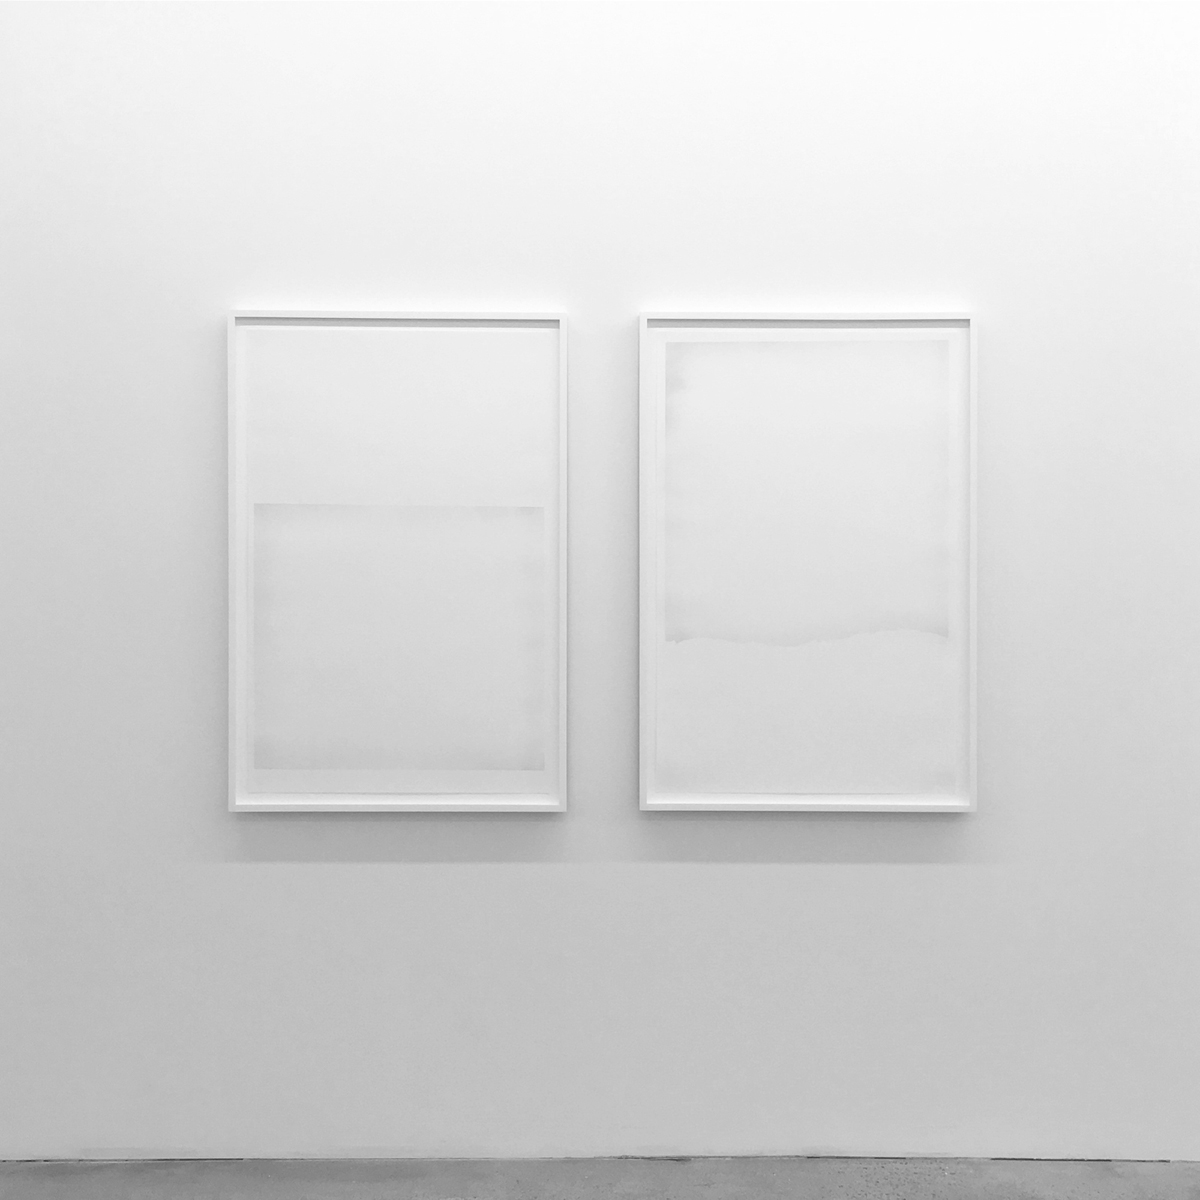   Untitled (Graphite #1 and #2, from the series An Accurate Silence)  Powered graphite on cotton paper 2016, 42 x 28 inches each 